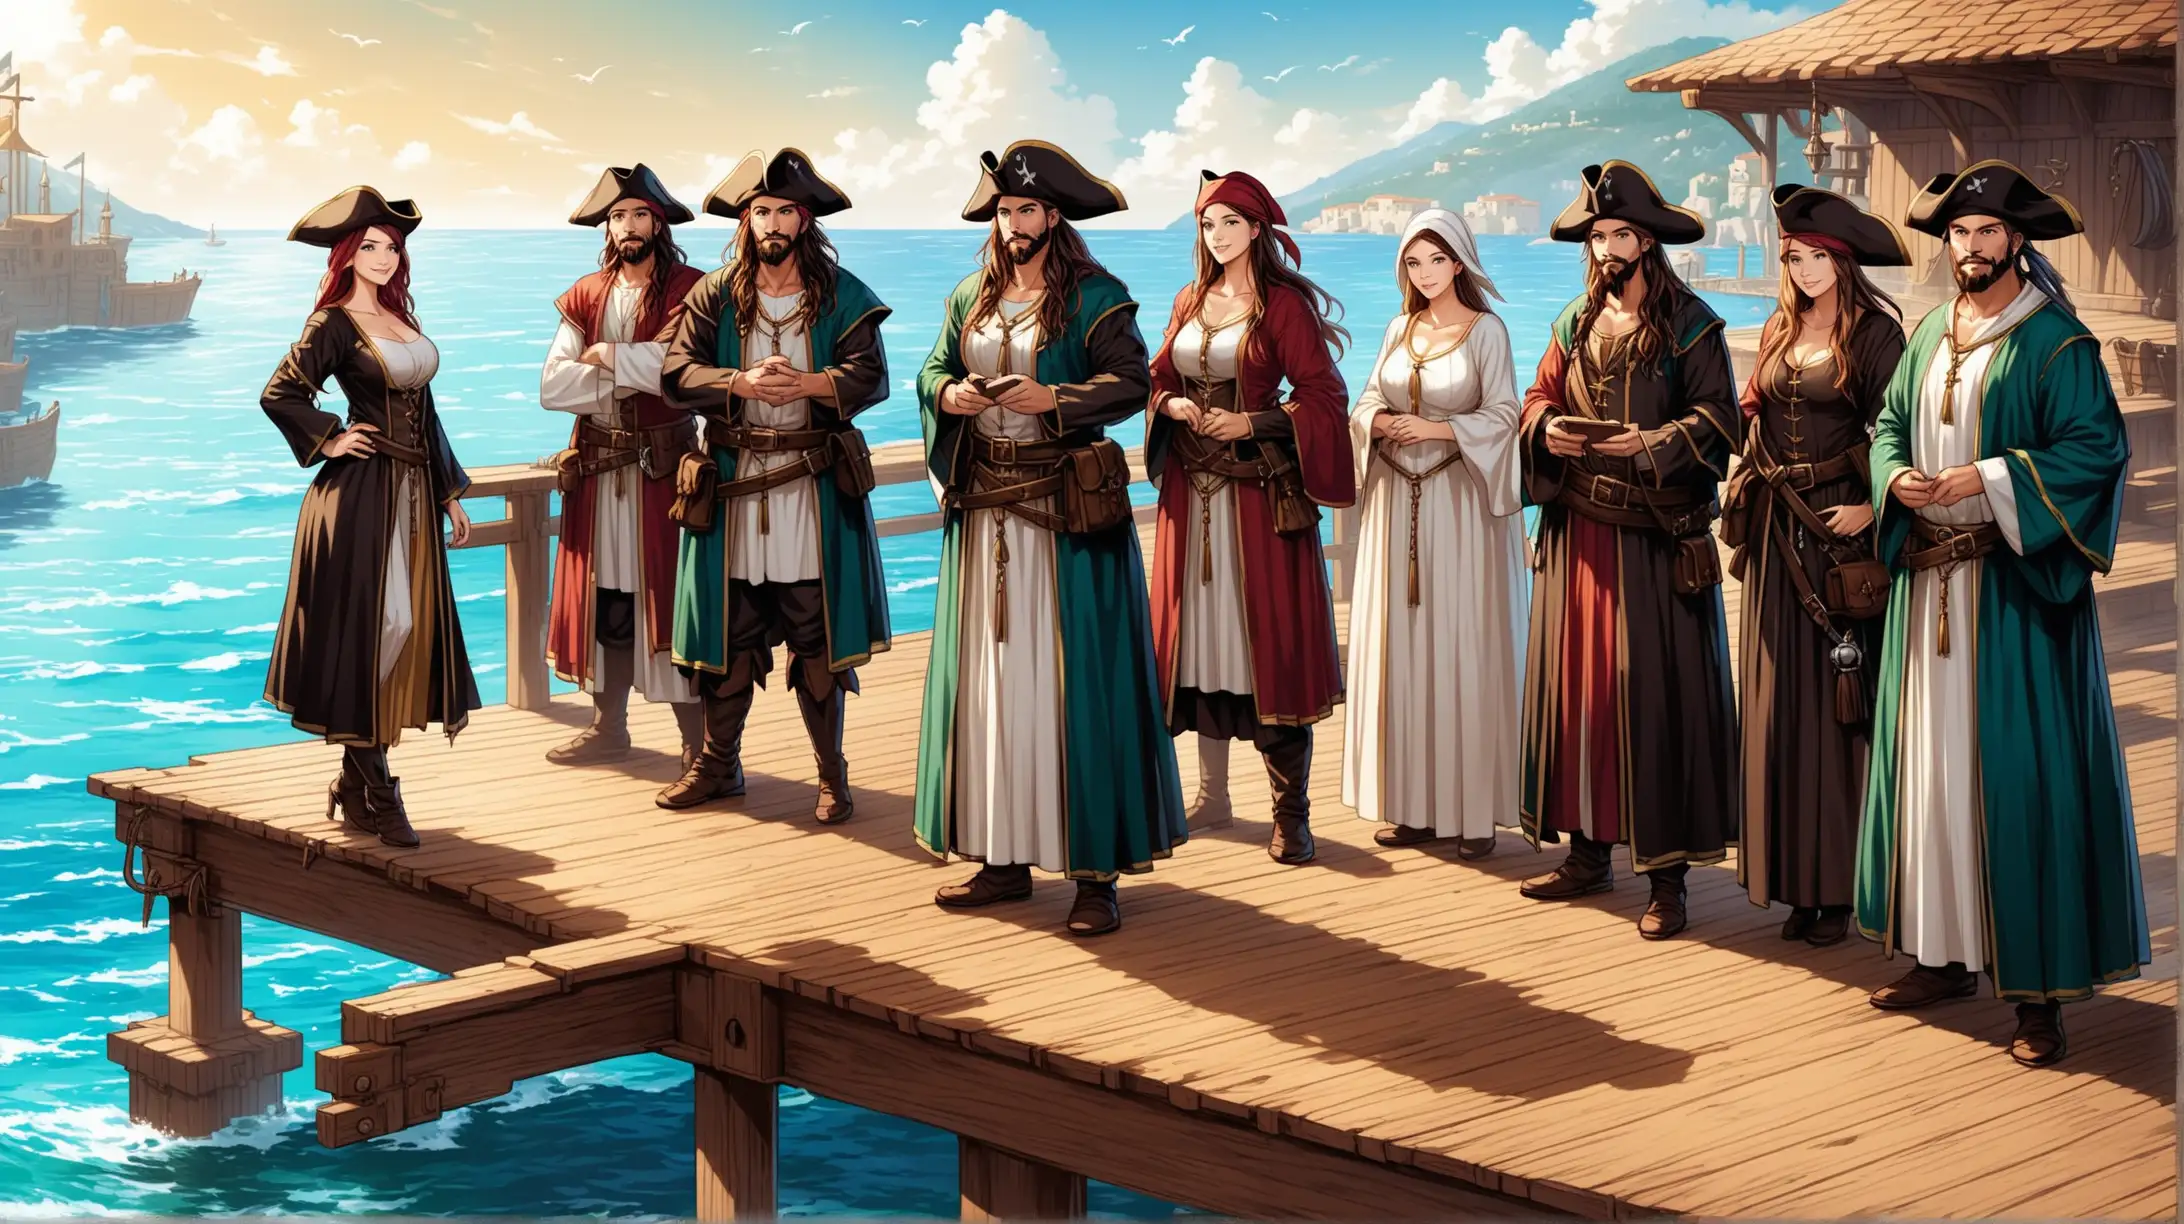 crew of pirates wizards and priests, men and women, Mediterranean, wooden dock, Medieval fantasy